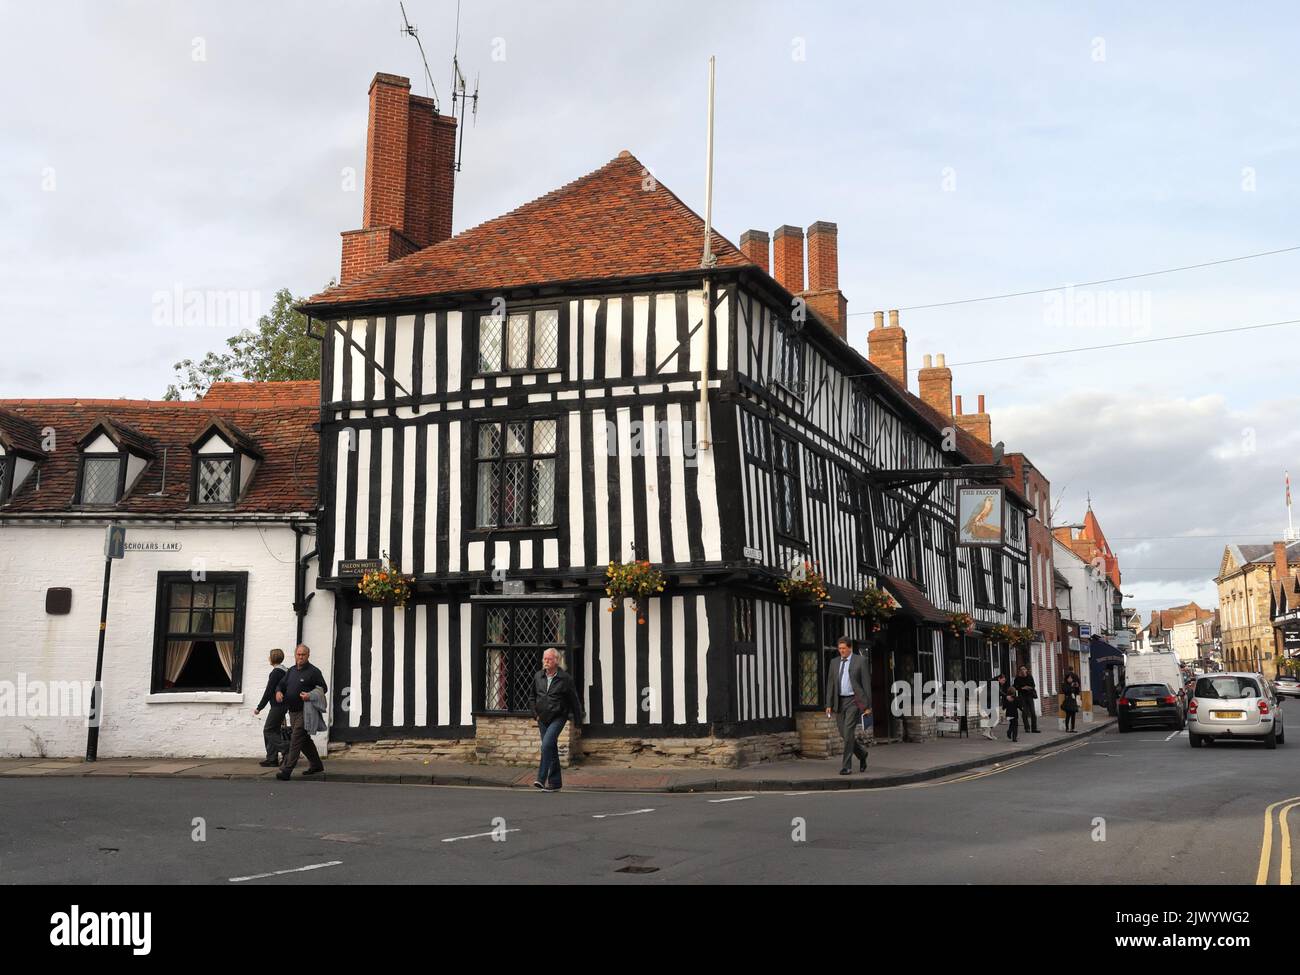 Hotel Indigo The Falcon Inn on Chapel street in Stratford Upon Avon England UK, Historic timbered building, listed building architecture. Street view Stock Photo